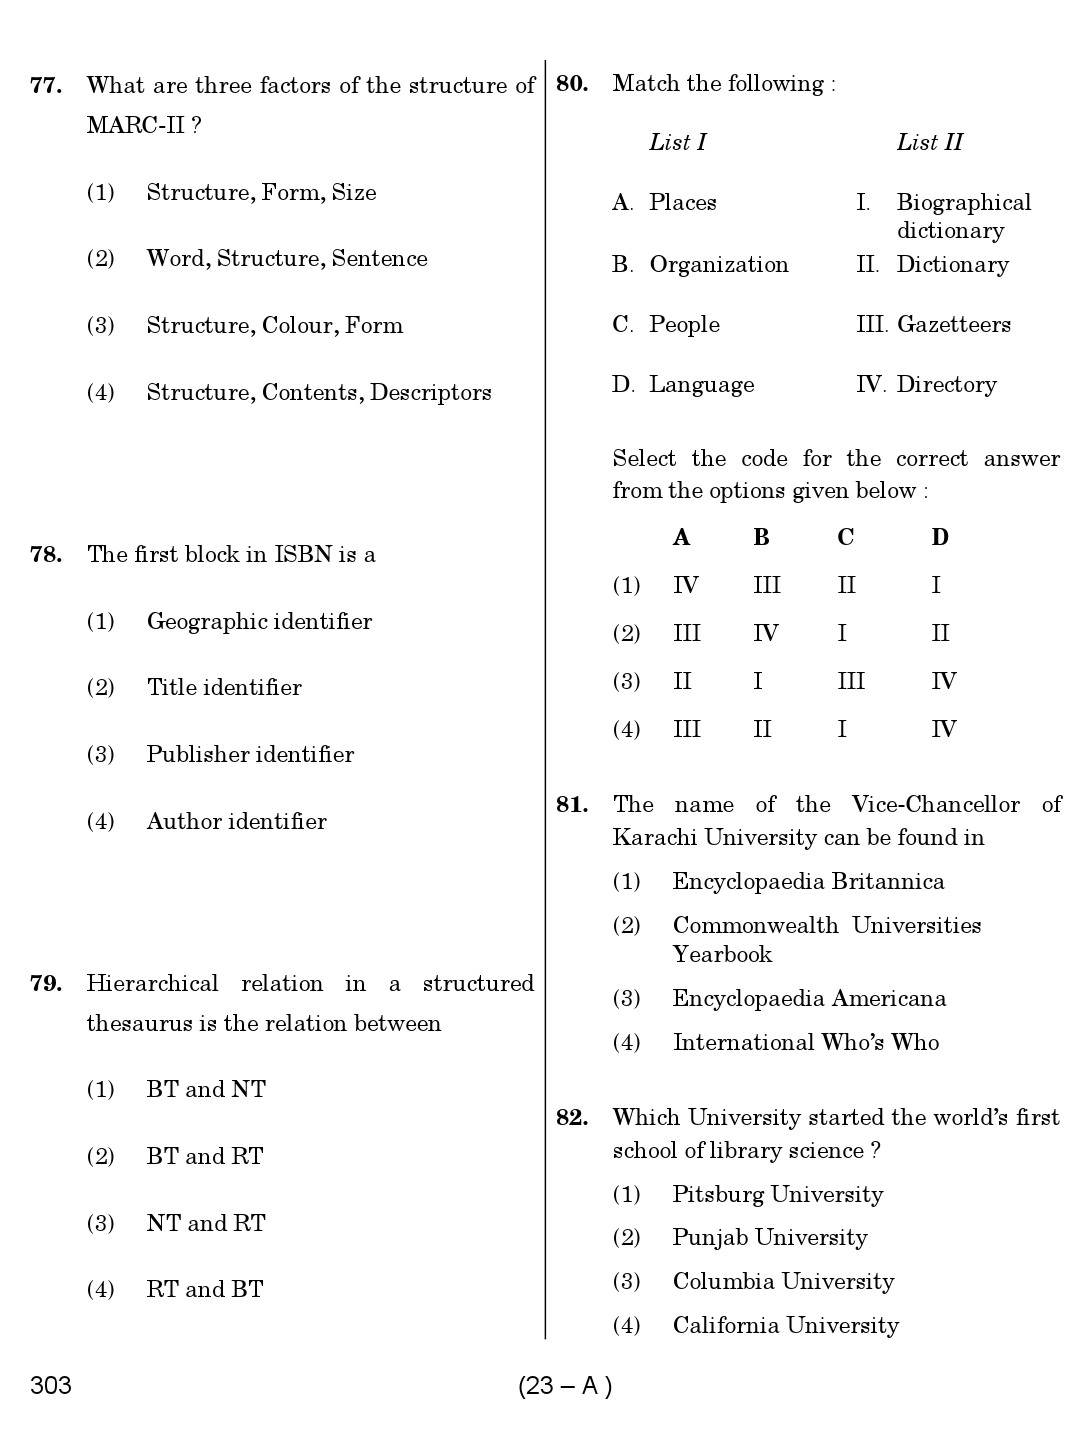 Karnataka PSC 303 Specific Paper II Librarian Exam Sample Question Paper 23